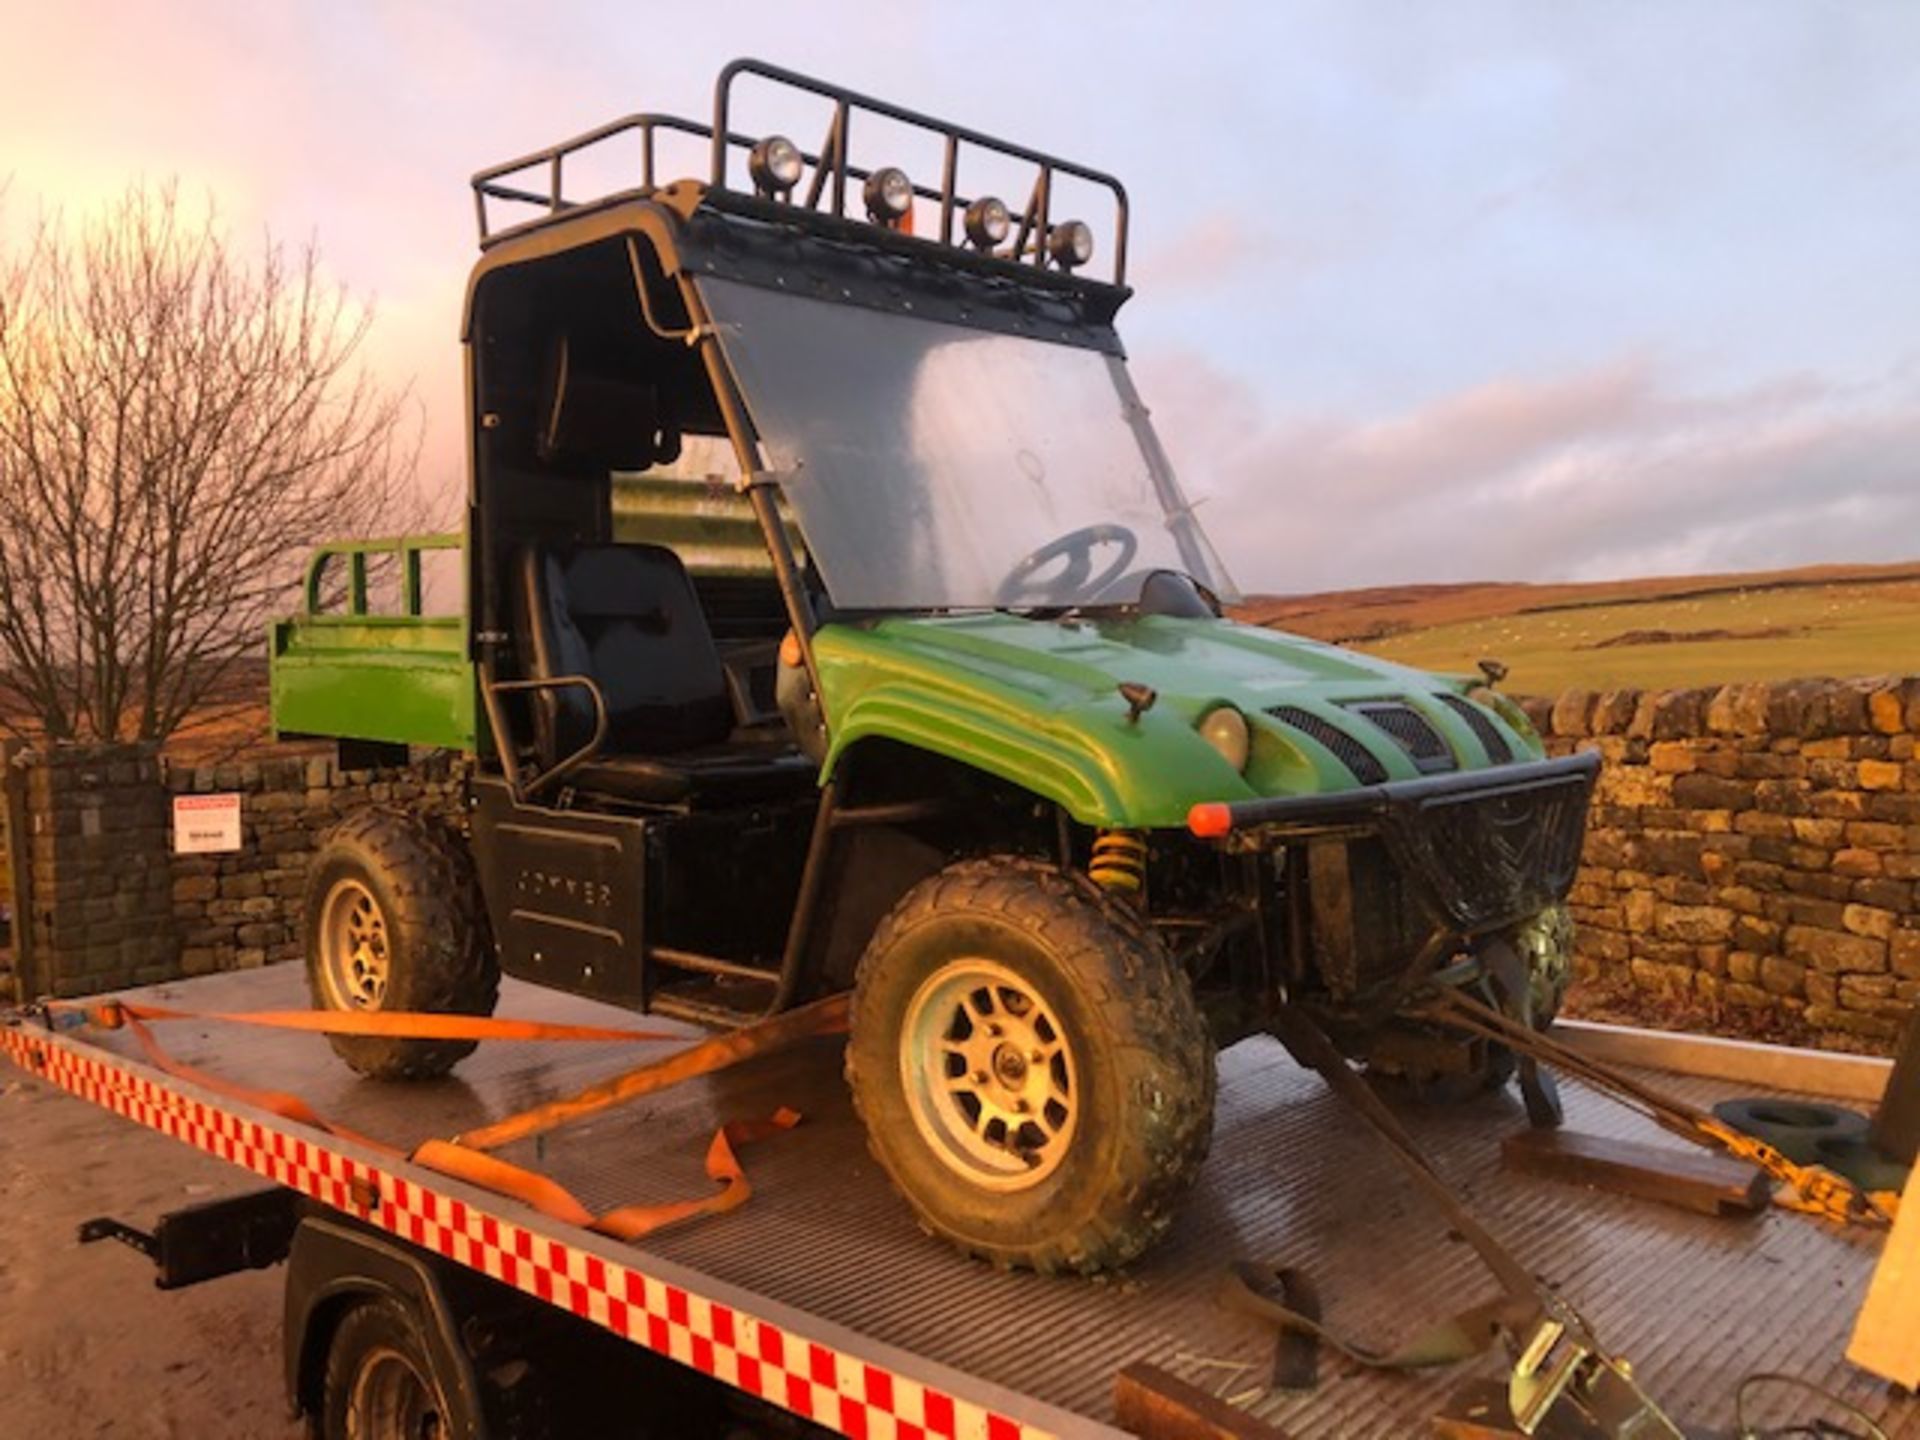 JOYNER JNSZ65OUV 4WD off road vehicle - petrol - green - manual tipper body - complete with manual.